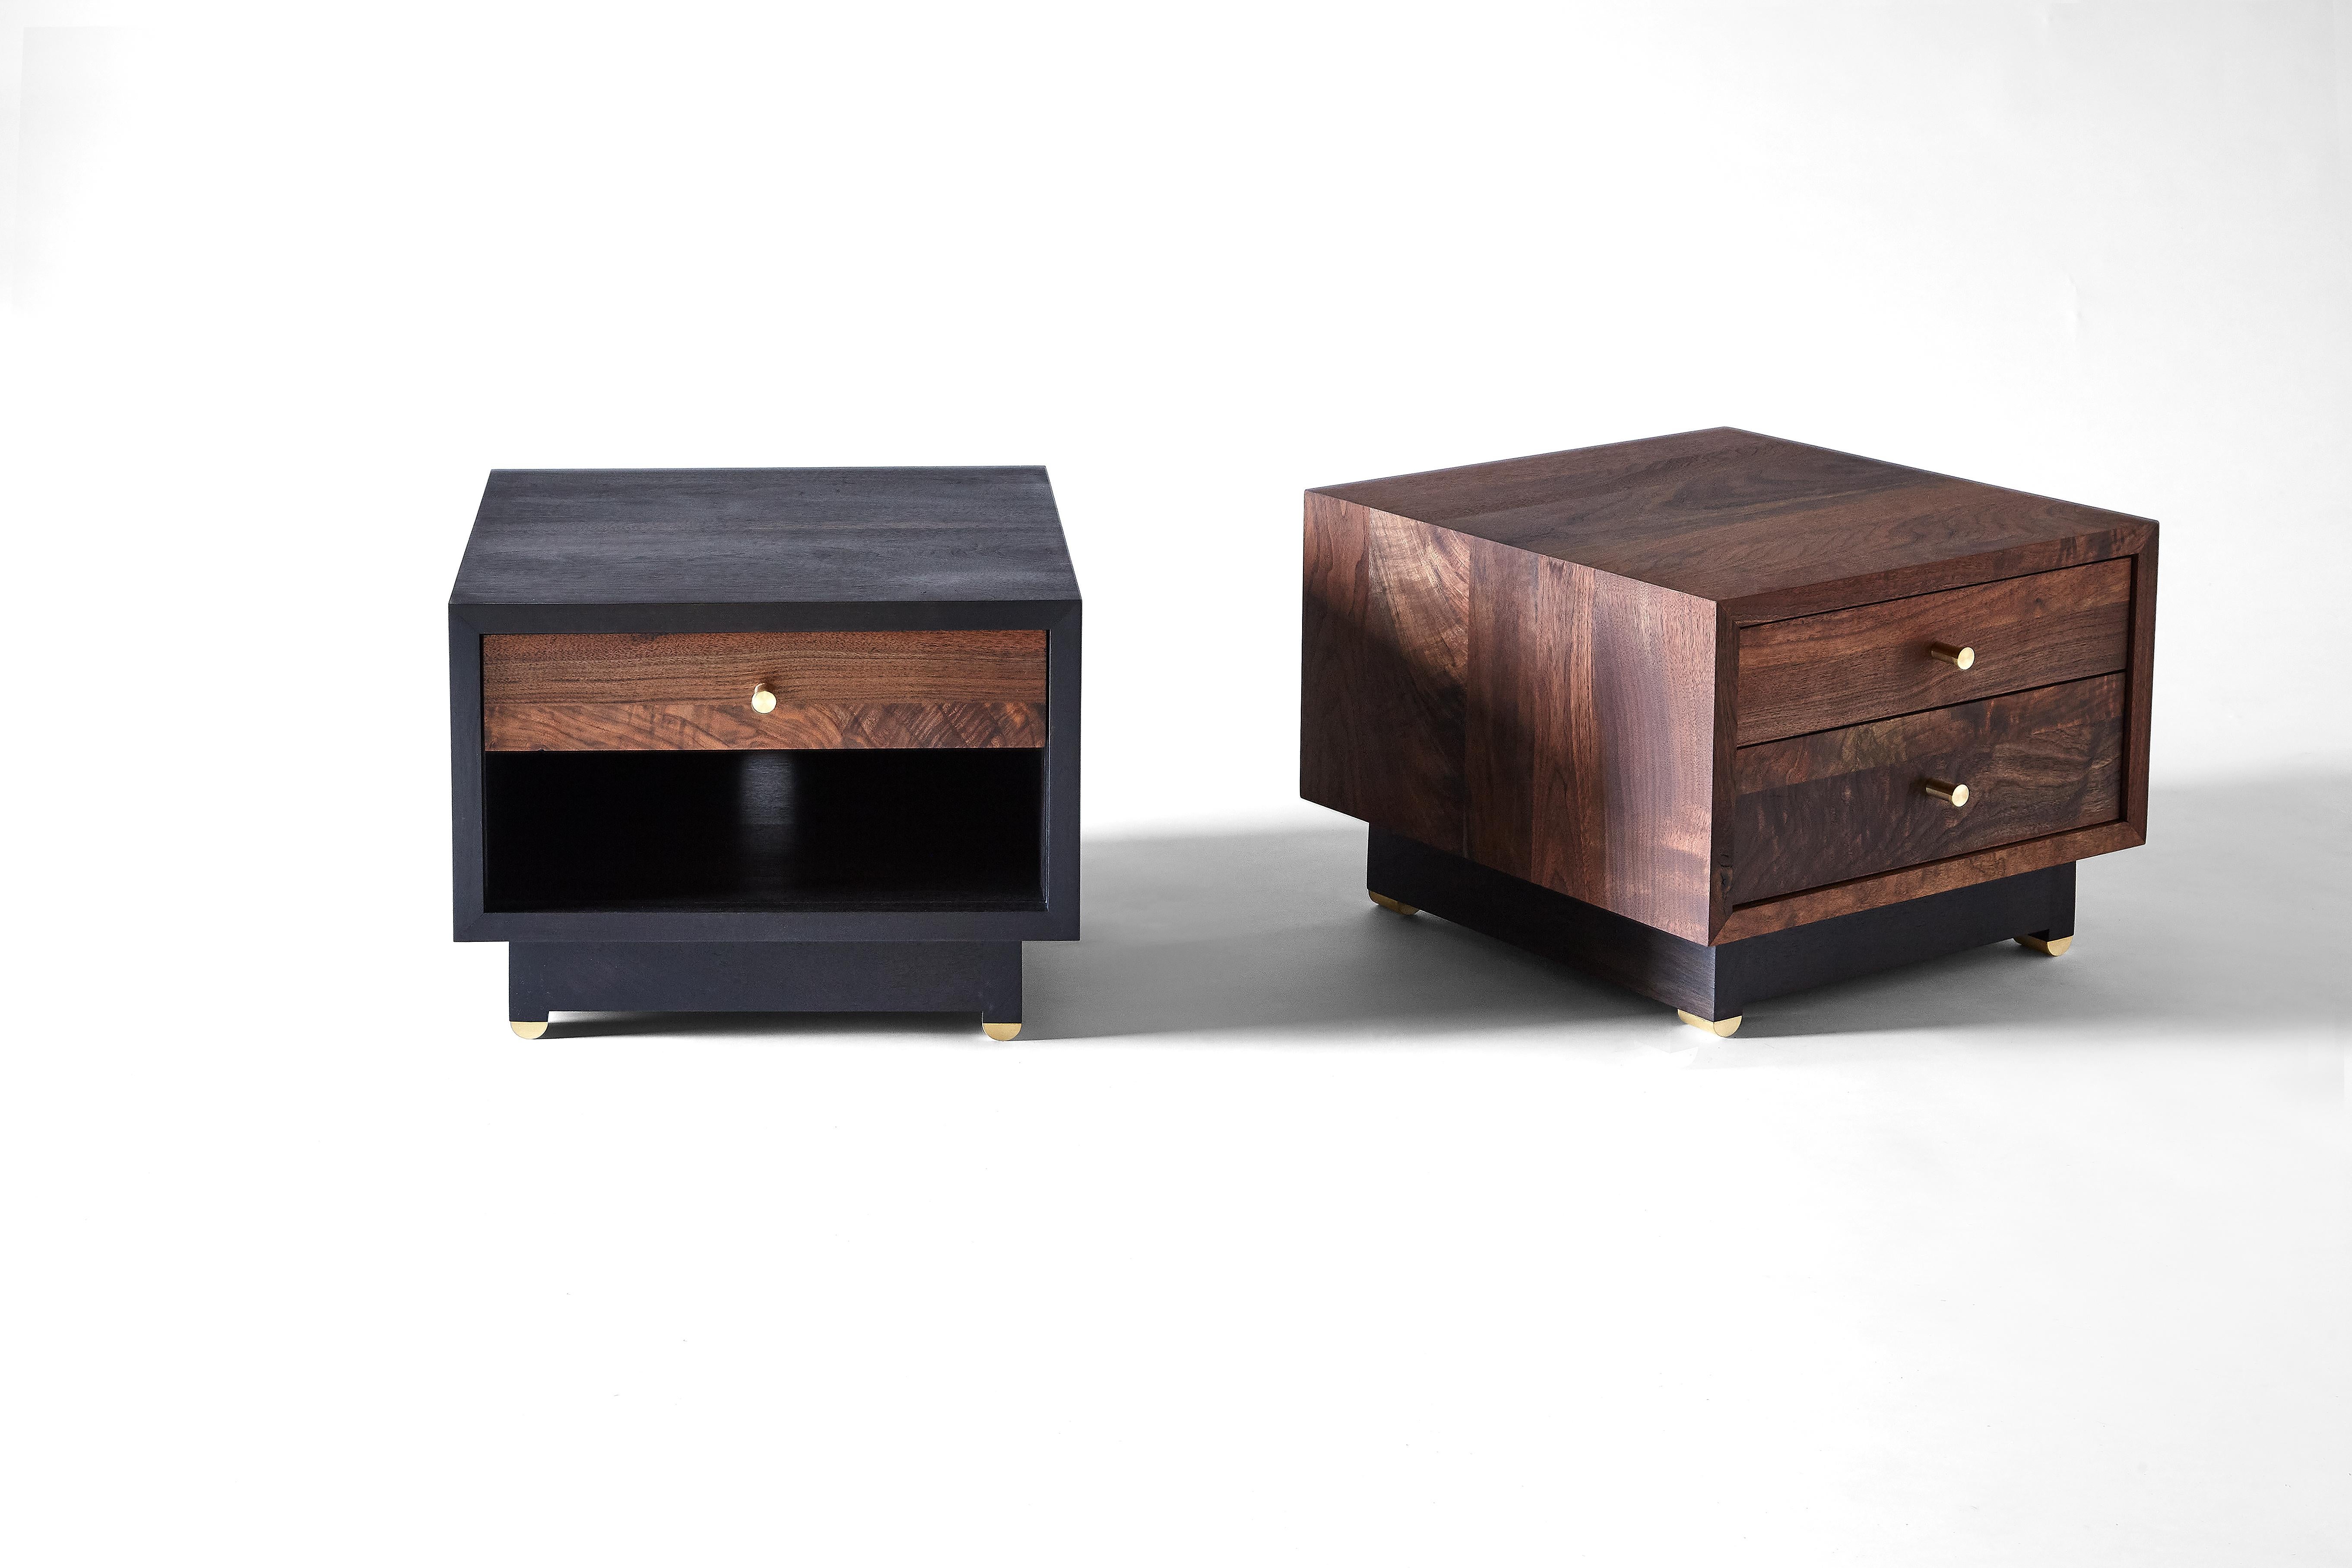 The Bena side cabinet is a bedside cabinet or side table that features natural or blackened brass pulls and feet. It is available in Claro walnut, black walnut (natural, oxidized or ebonized), maple (bleached or oxidized), cherry, ebonized ash and